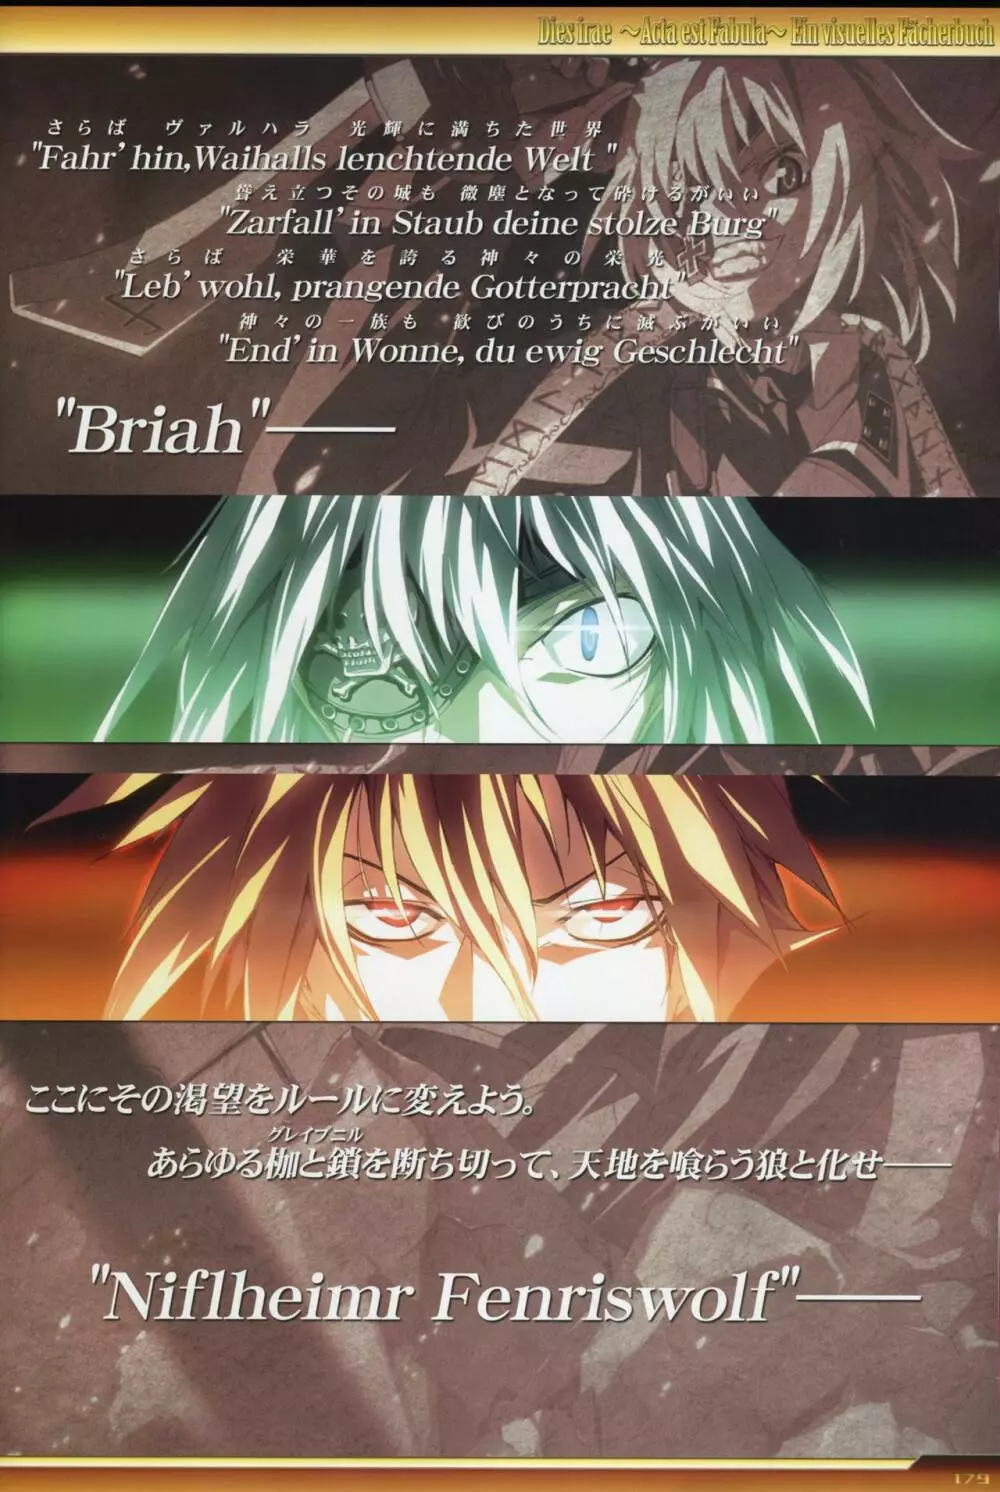 Dies irae Visual Fanbook - White Book Page.180